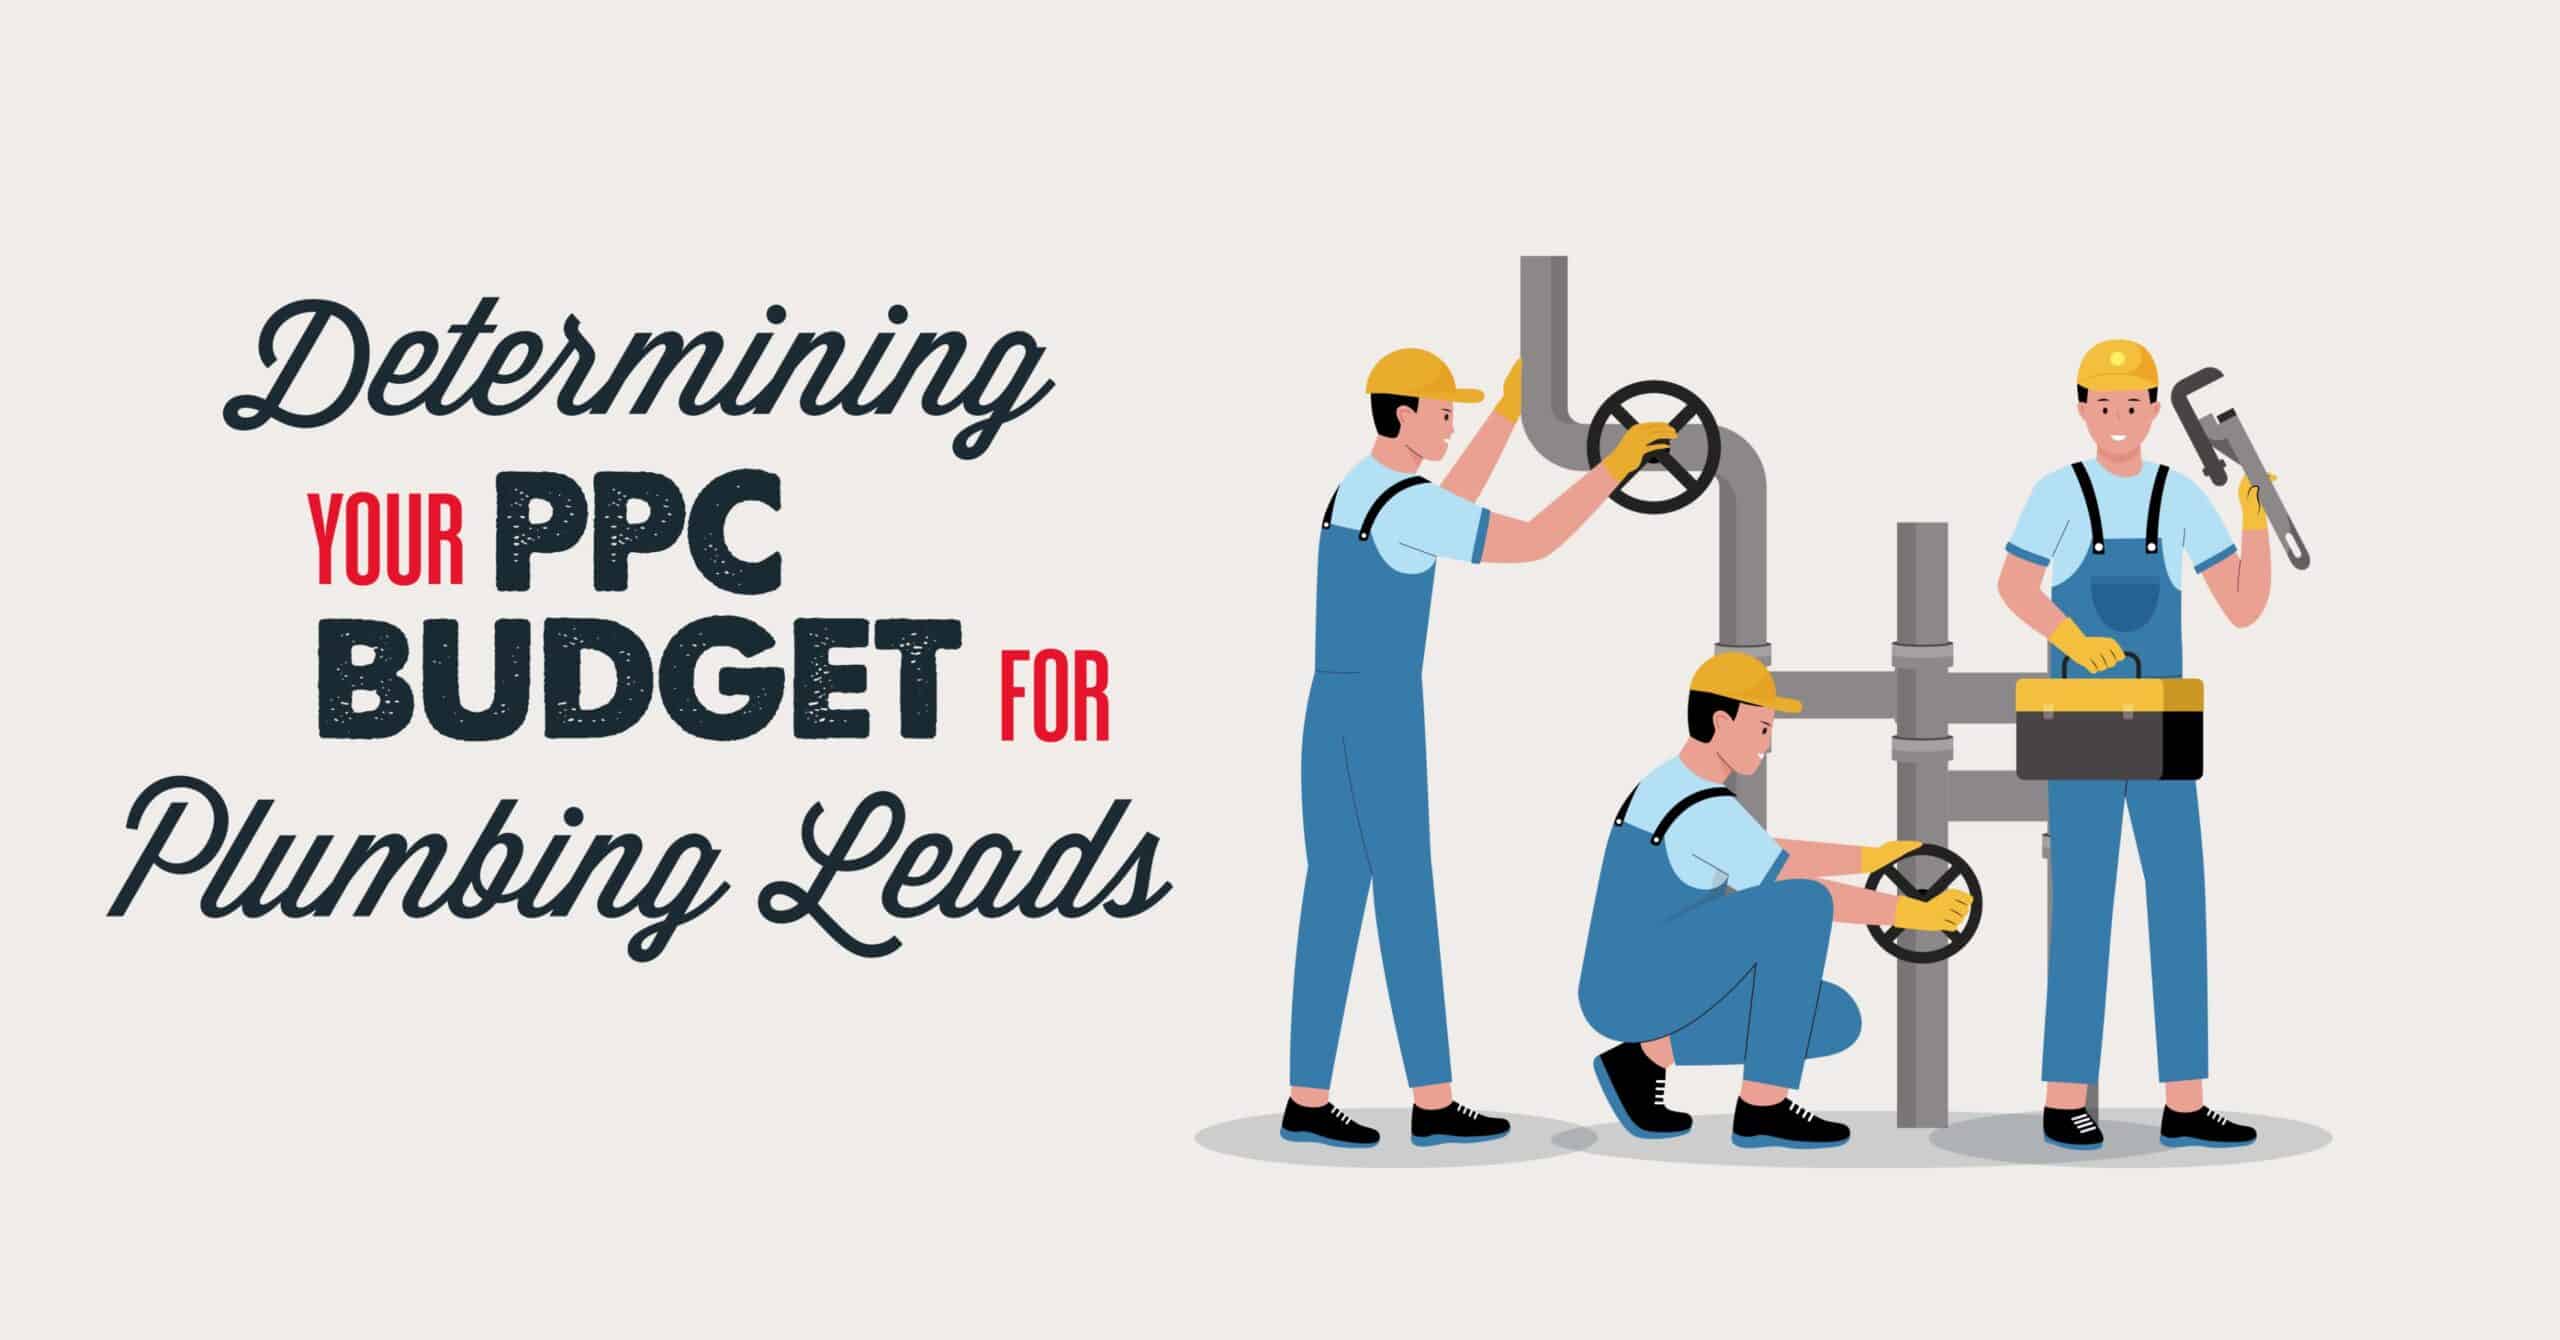 Determining your PPC budget for plumbing leads